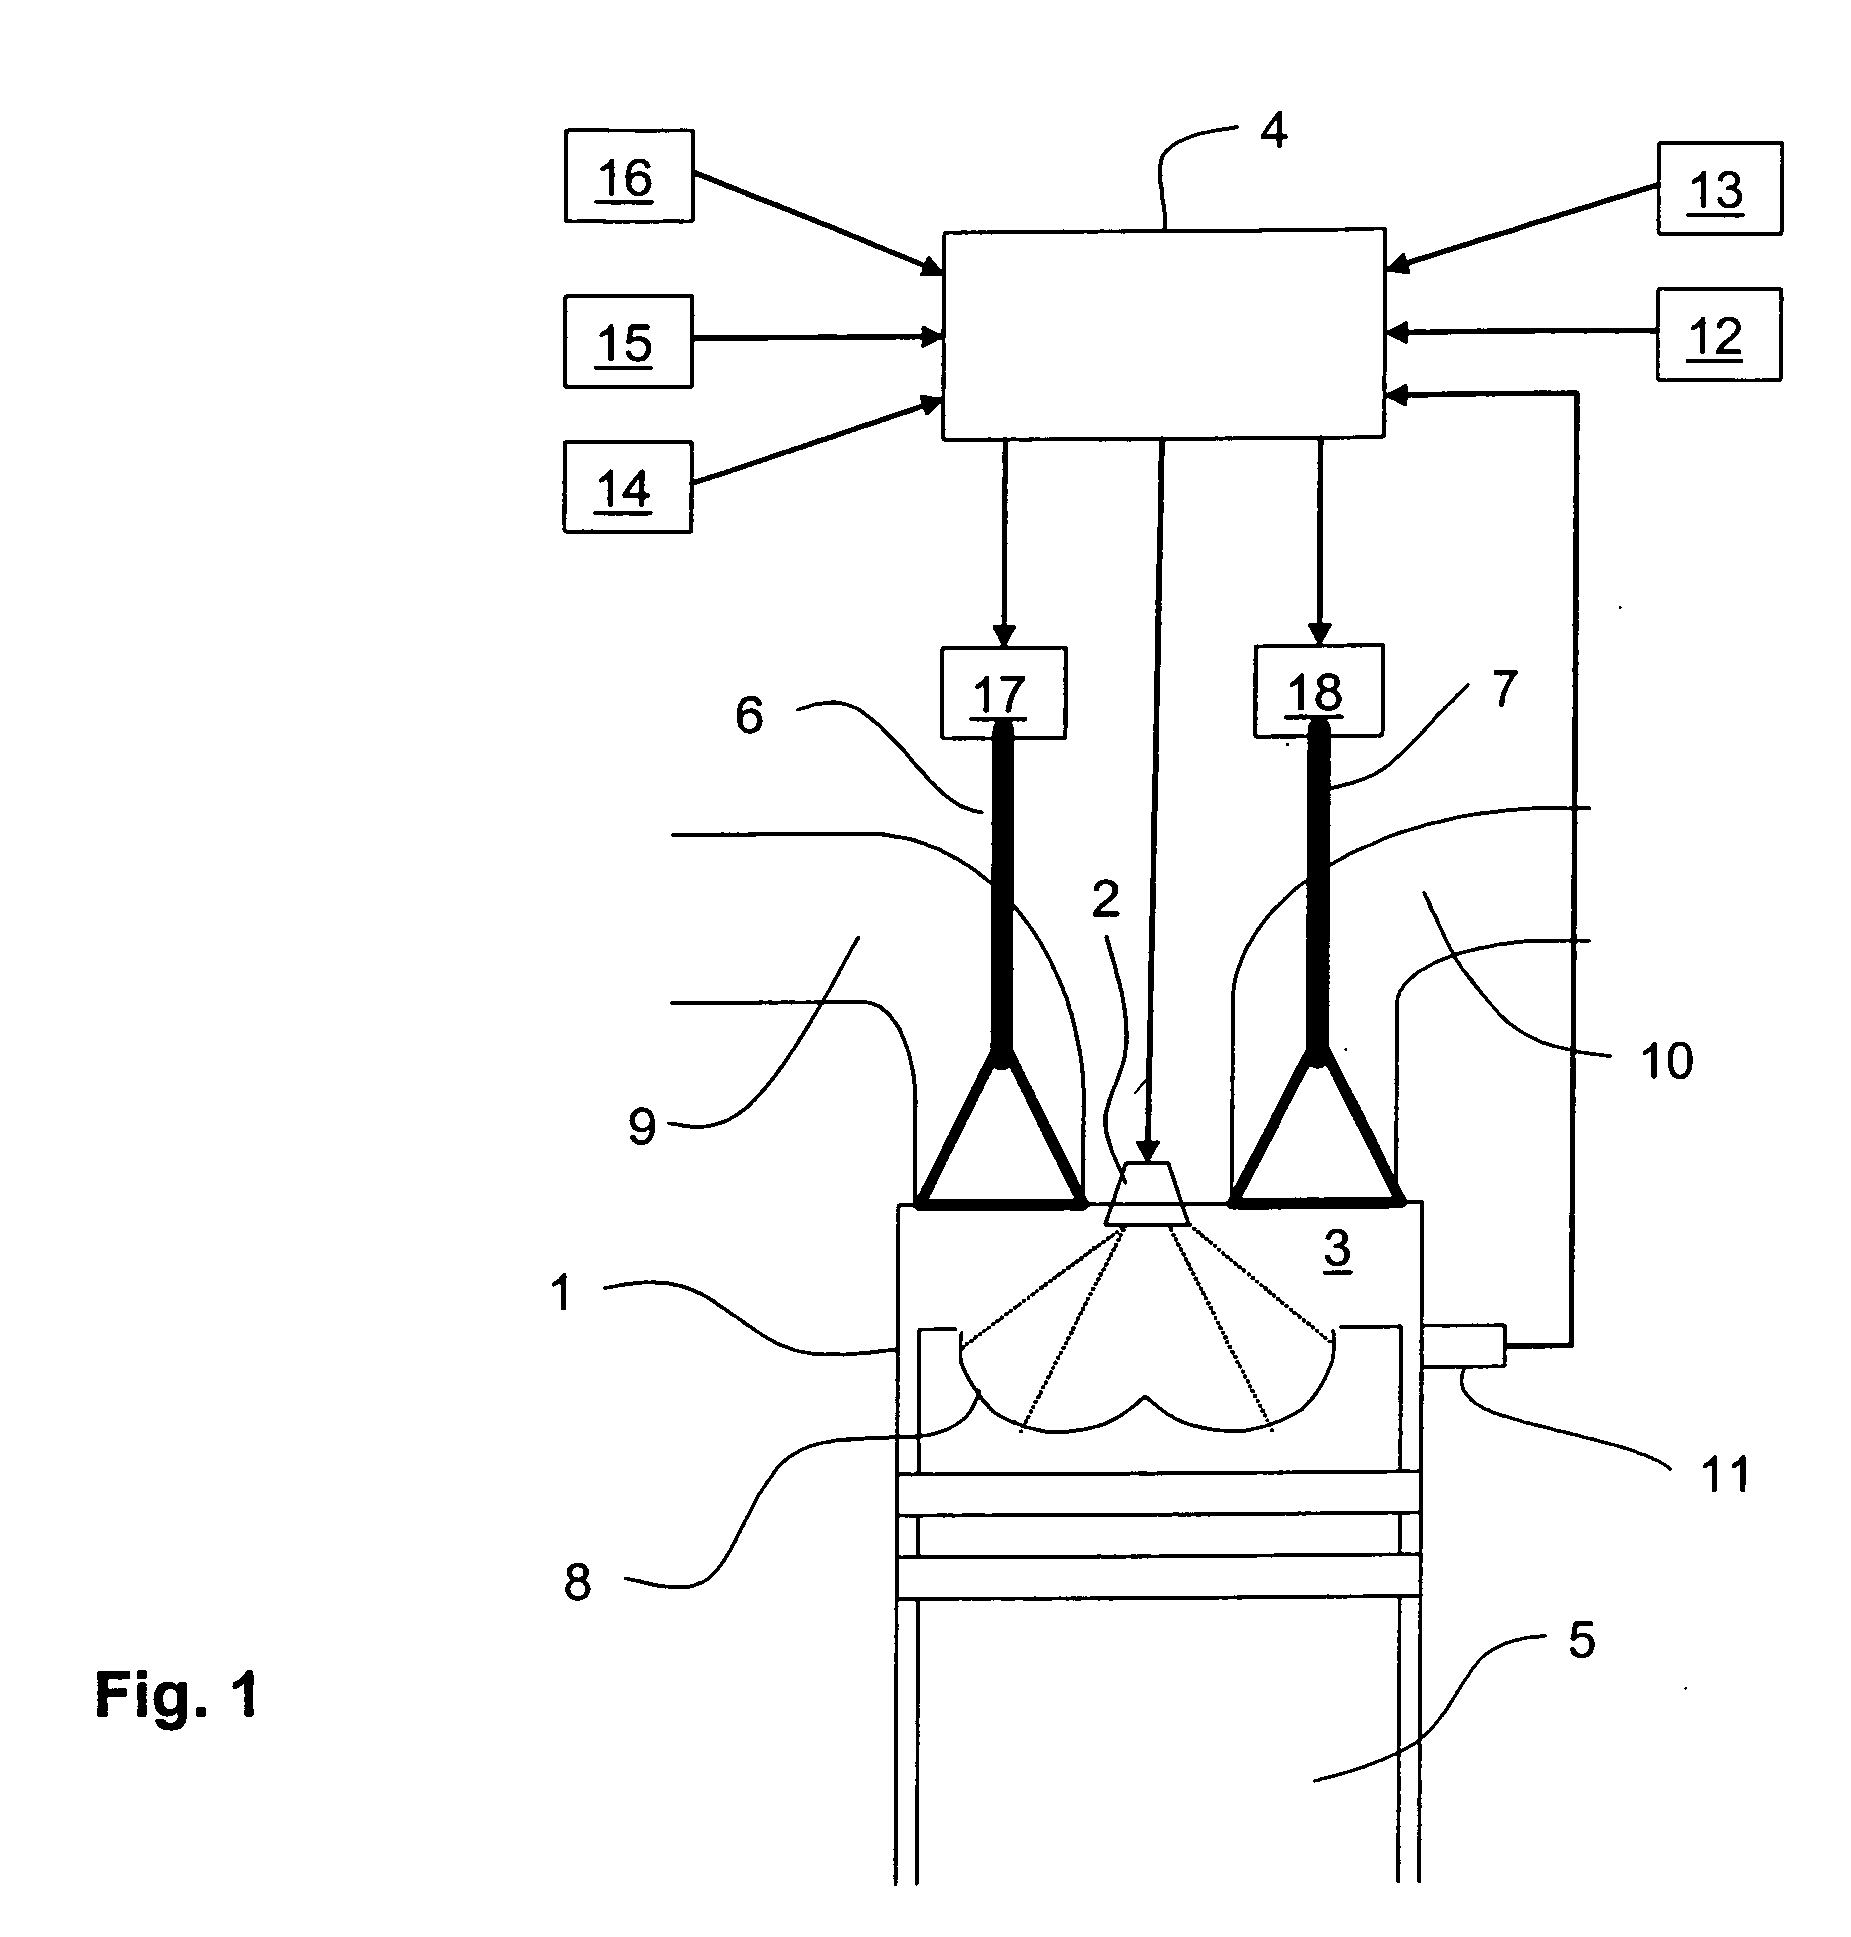 Method for using partial homogeneous charge compression ignition in a diesel internal combustion engine for NOx trap regeneration